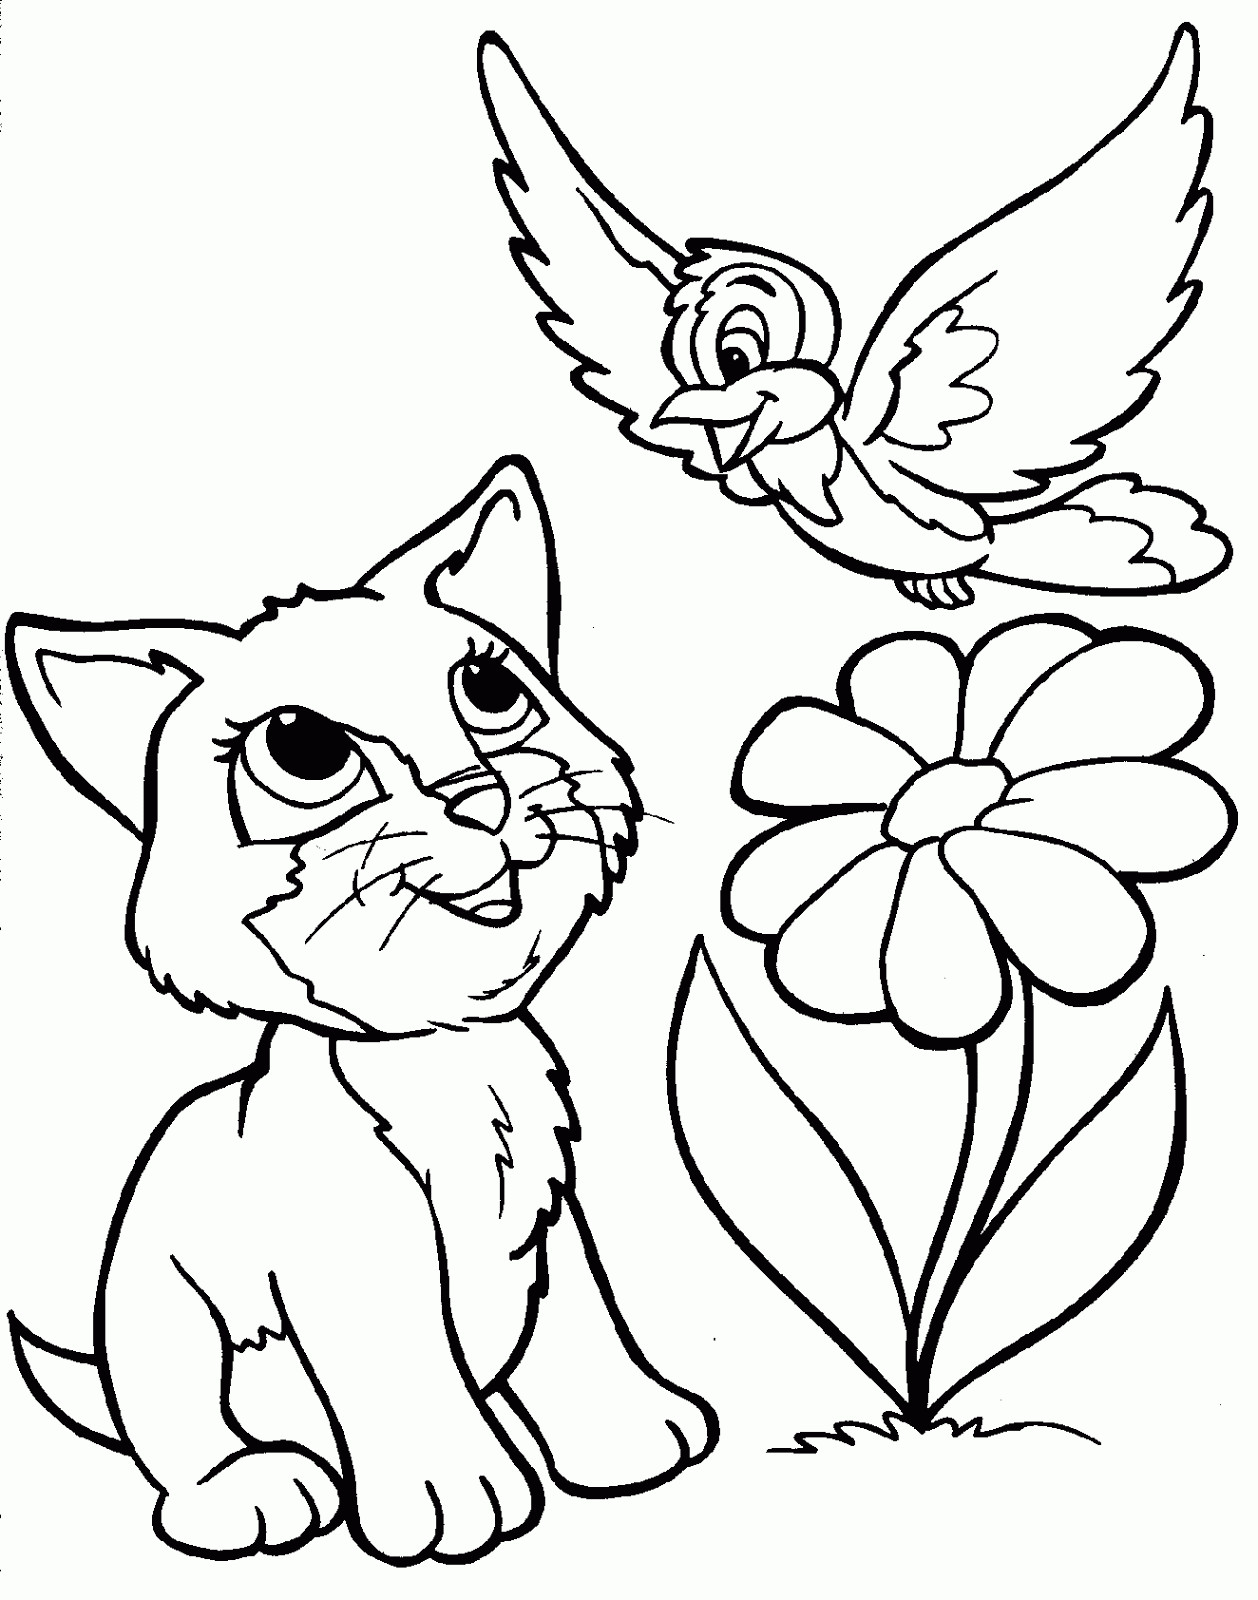 Awesome Coloring Pages For Kids
 Free Coloring Pages For Kids